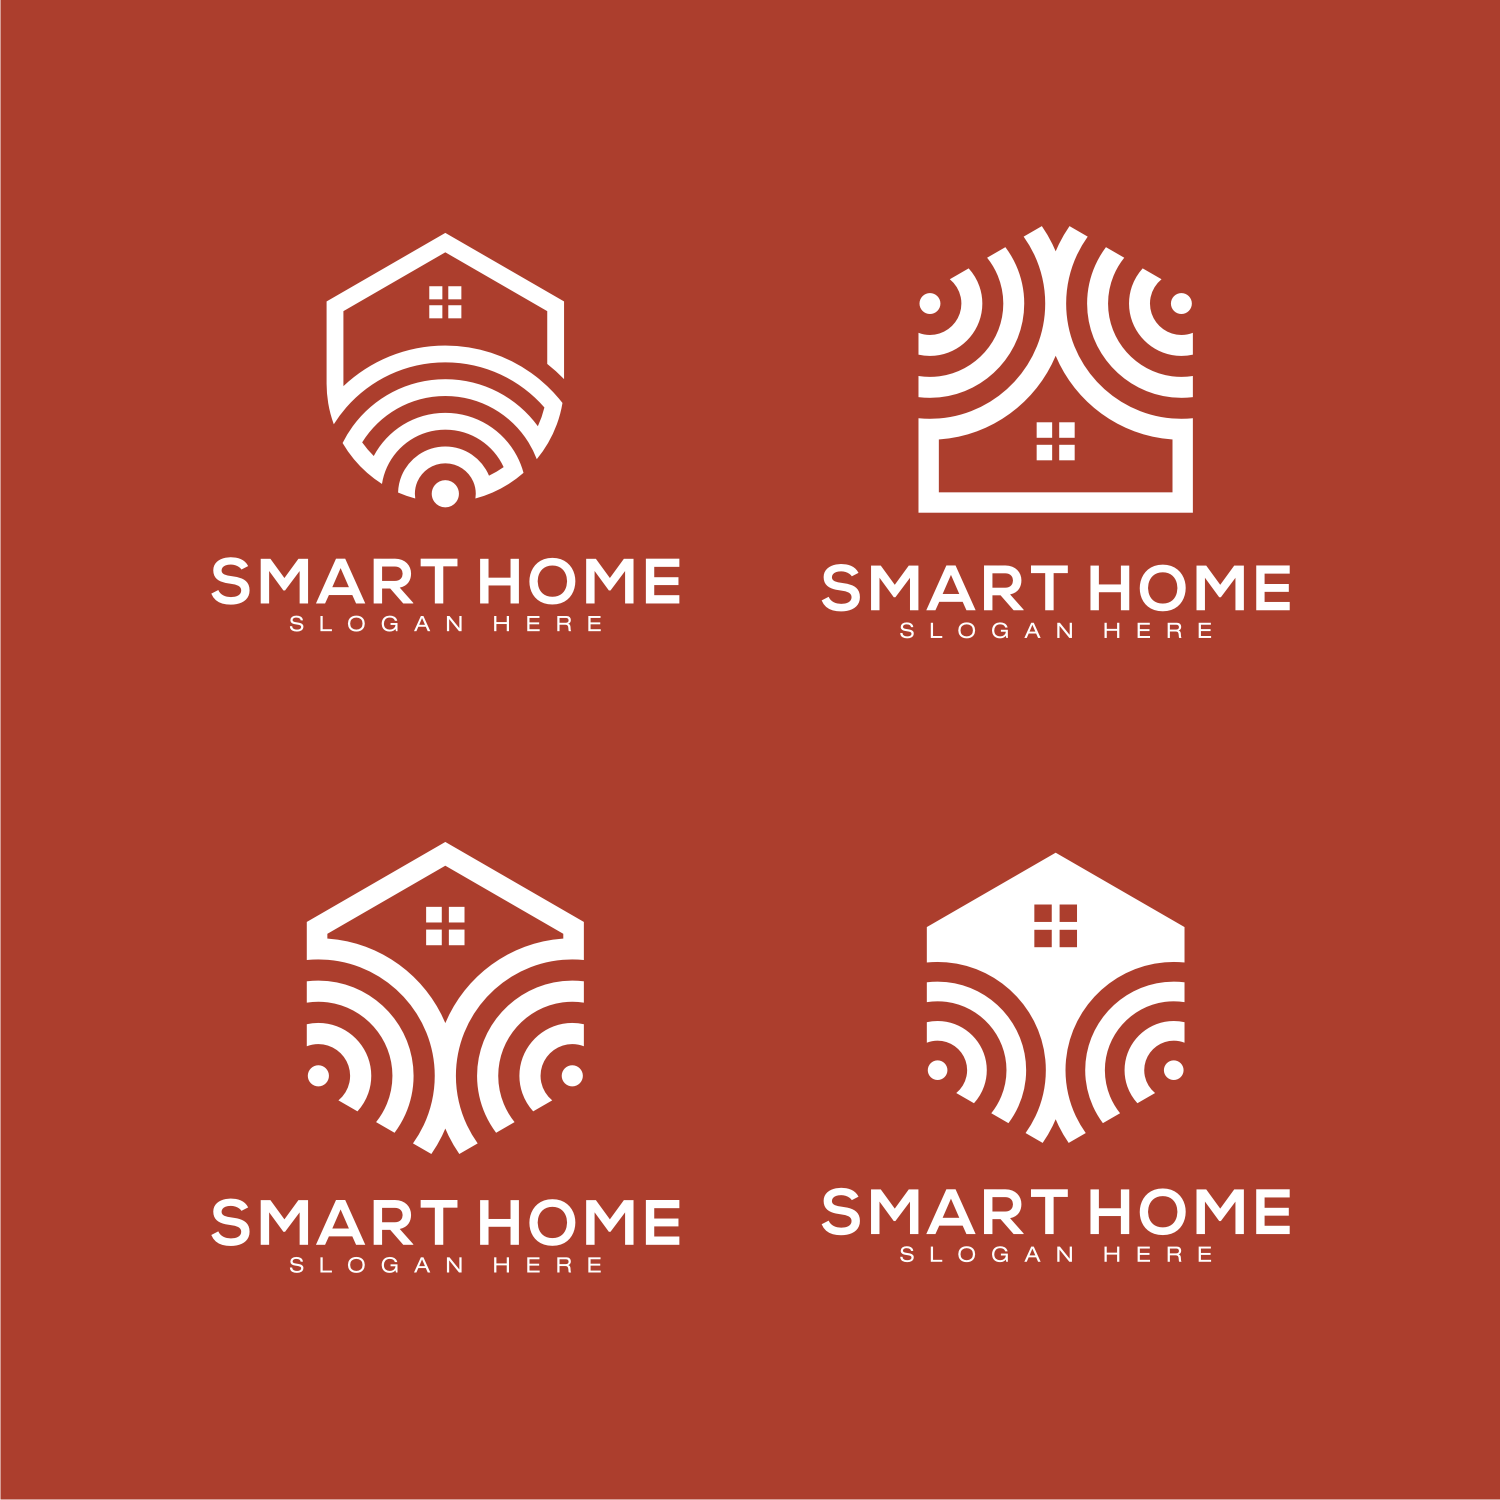 Set of Smart Home Tech, Line Art Style Logo for your corporate style.